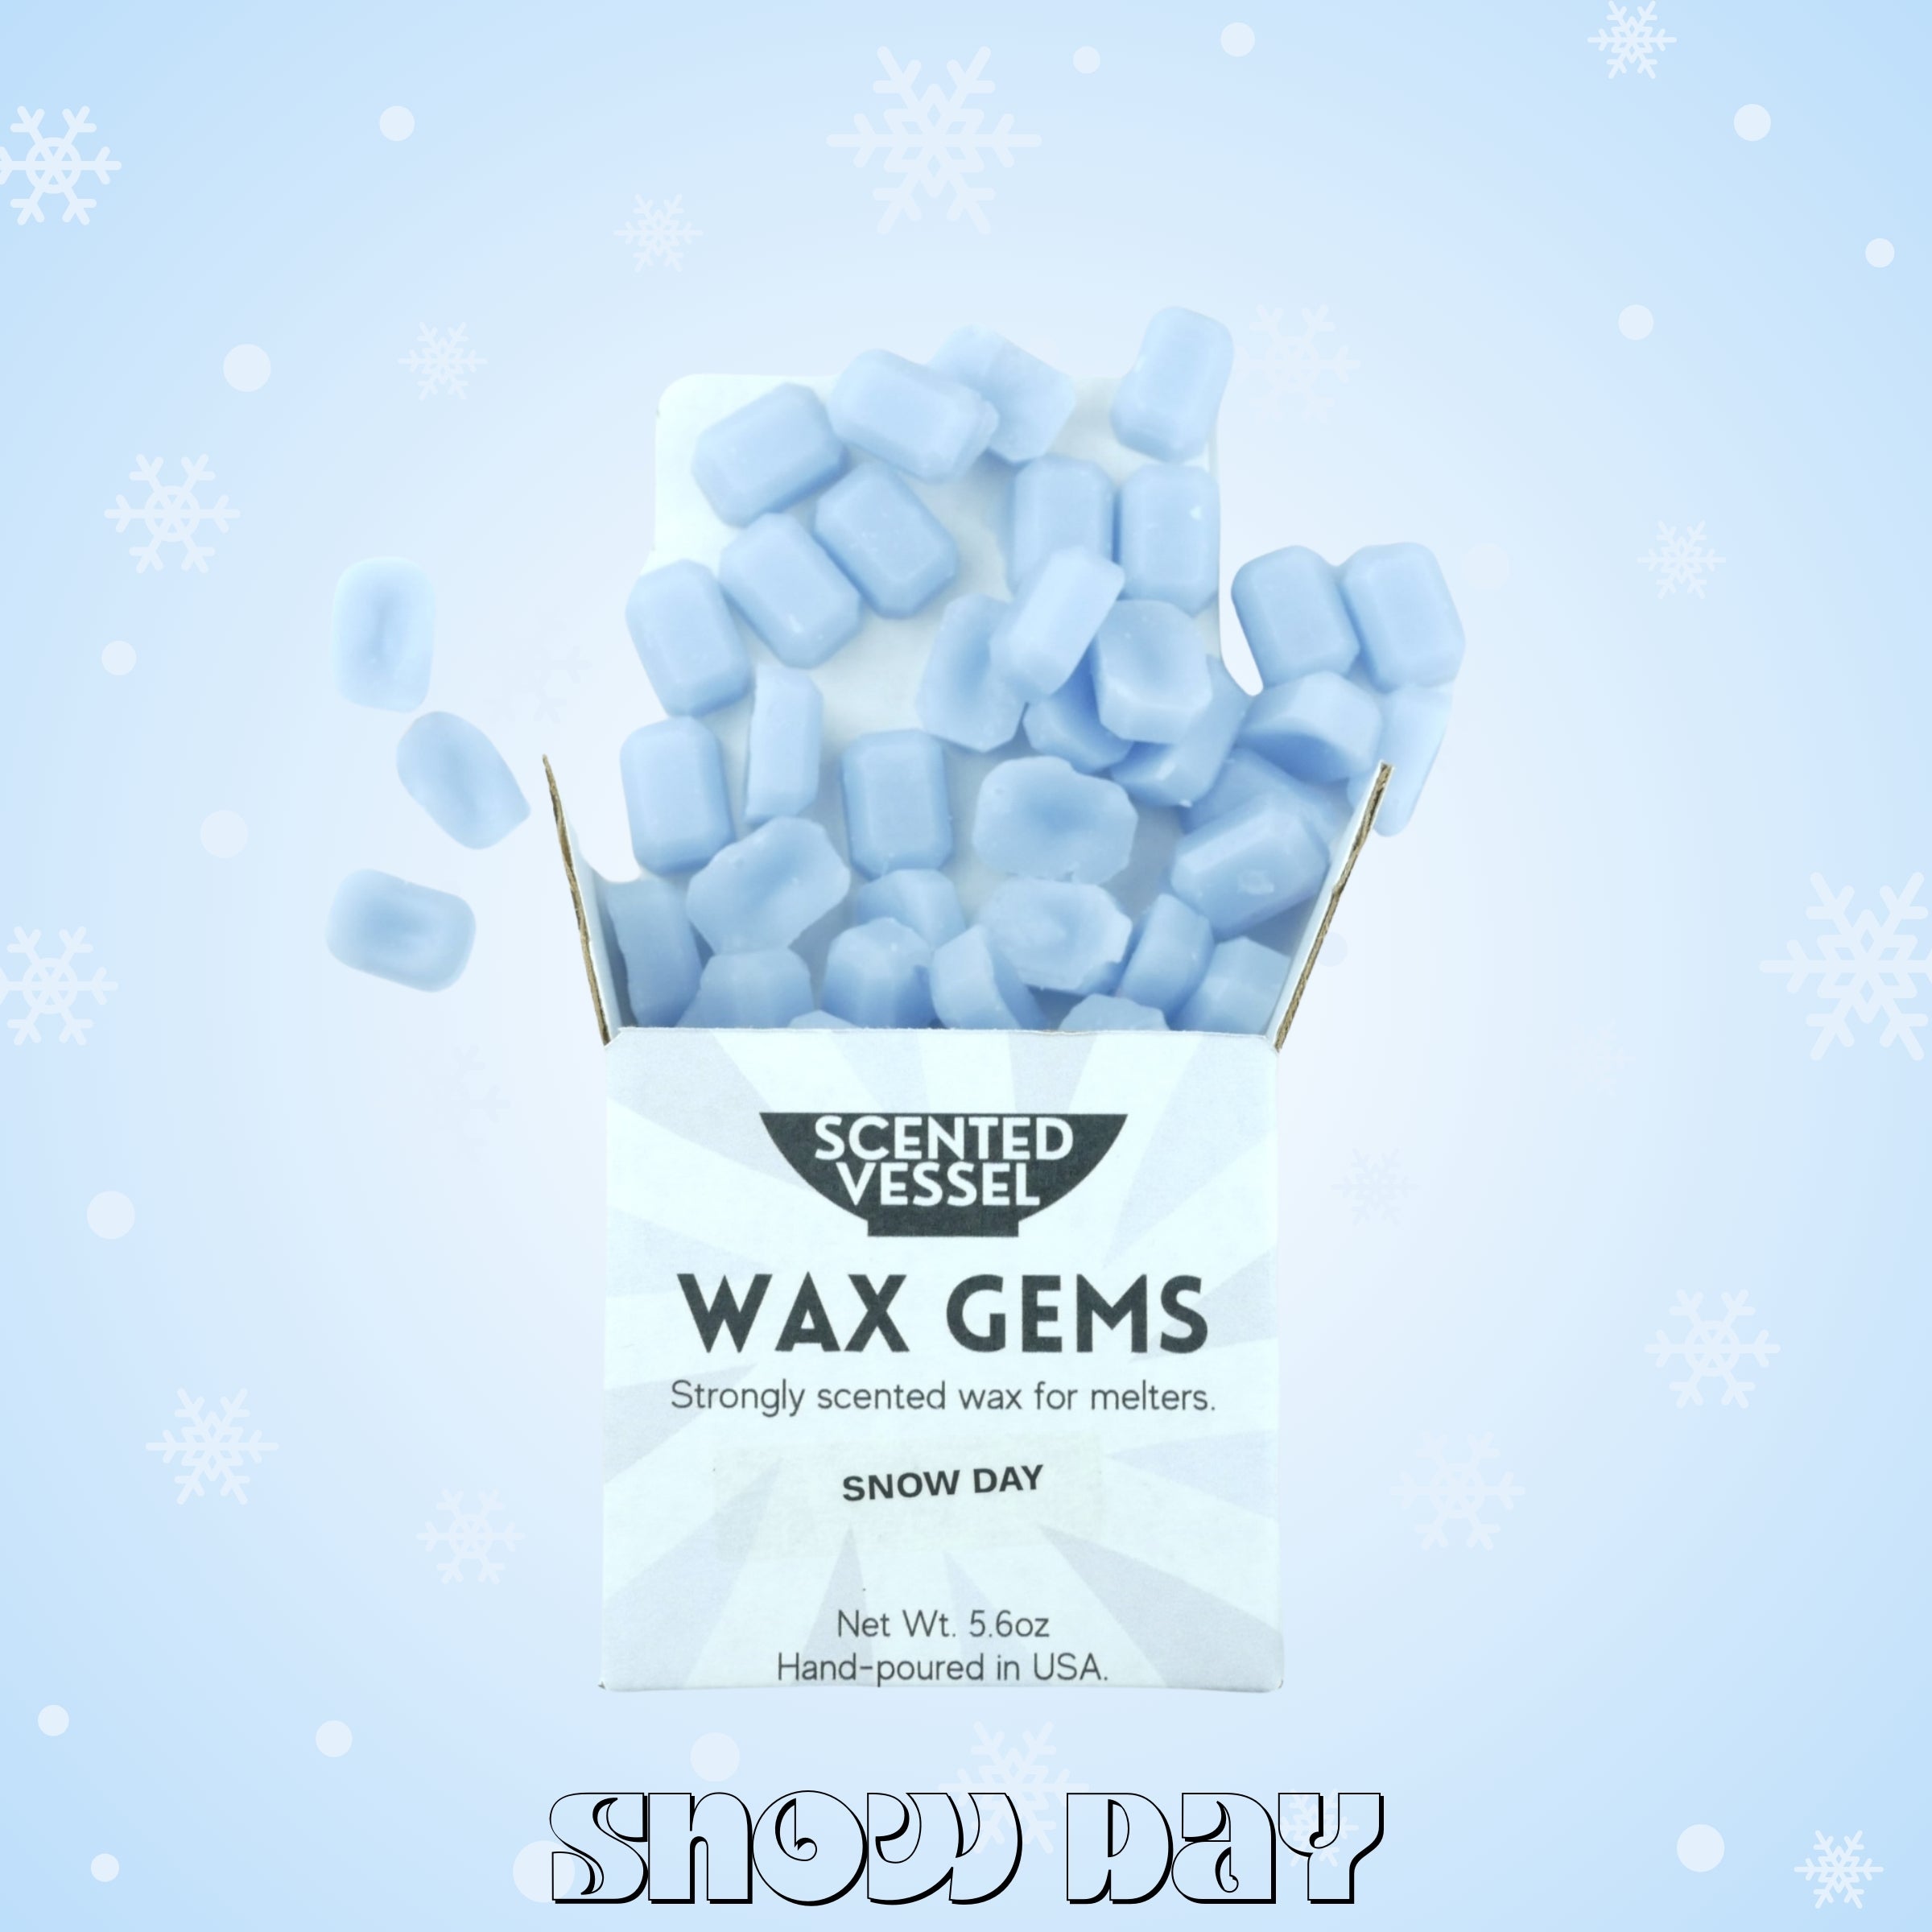 Snow Day 5.6oz Wax Gems by Scented Vessel